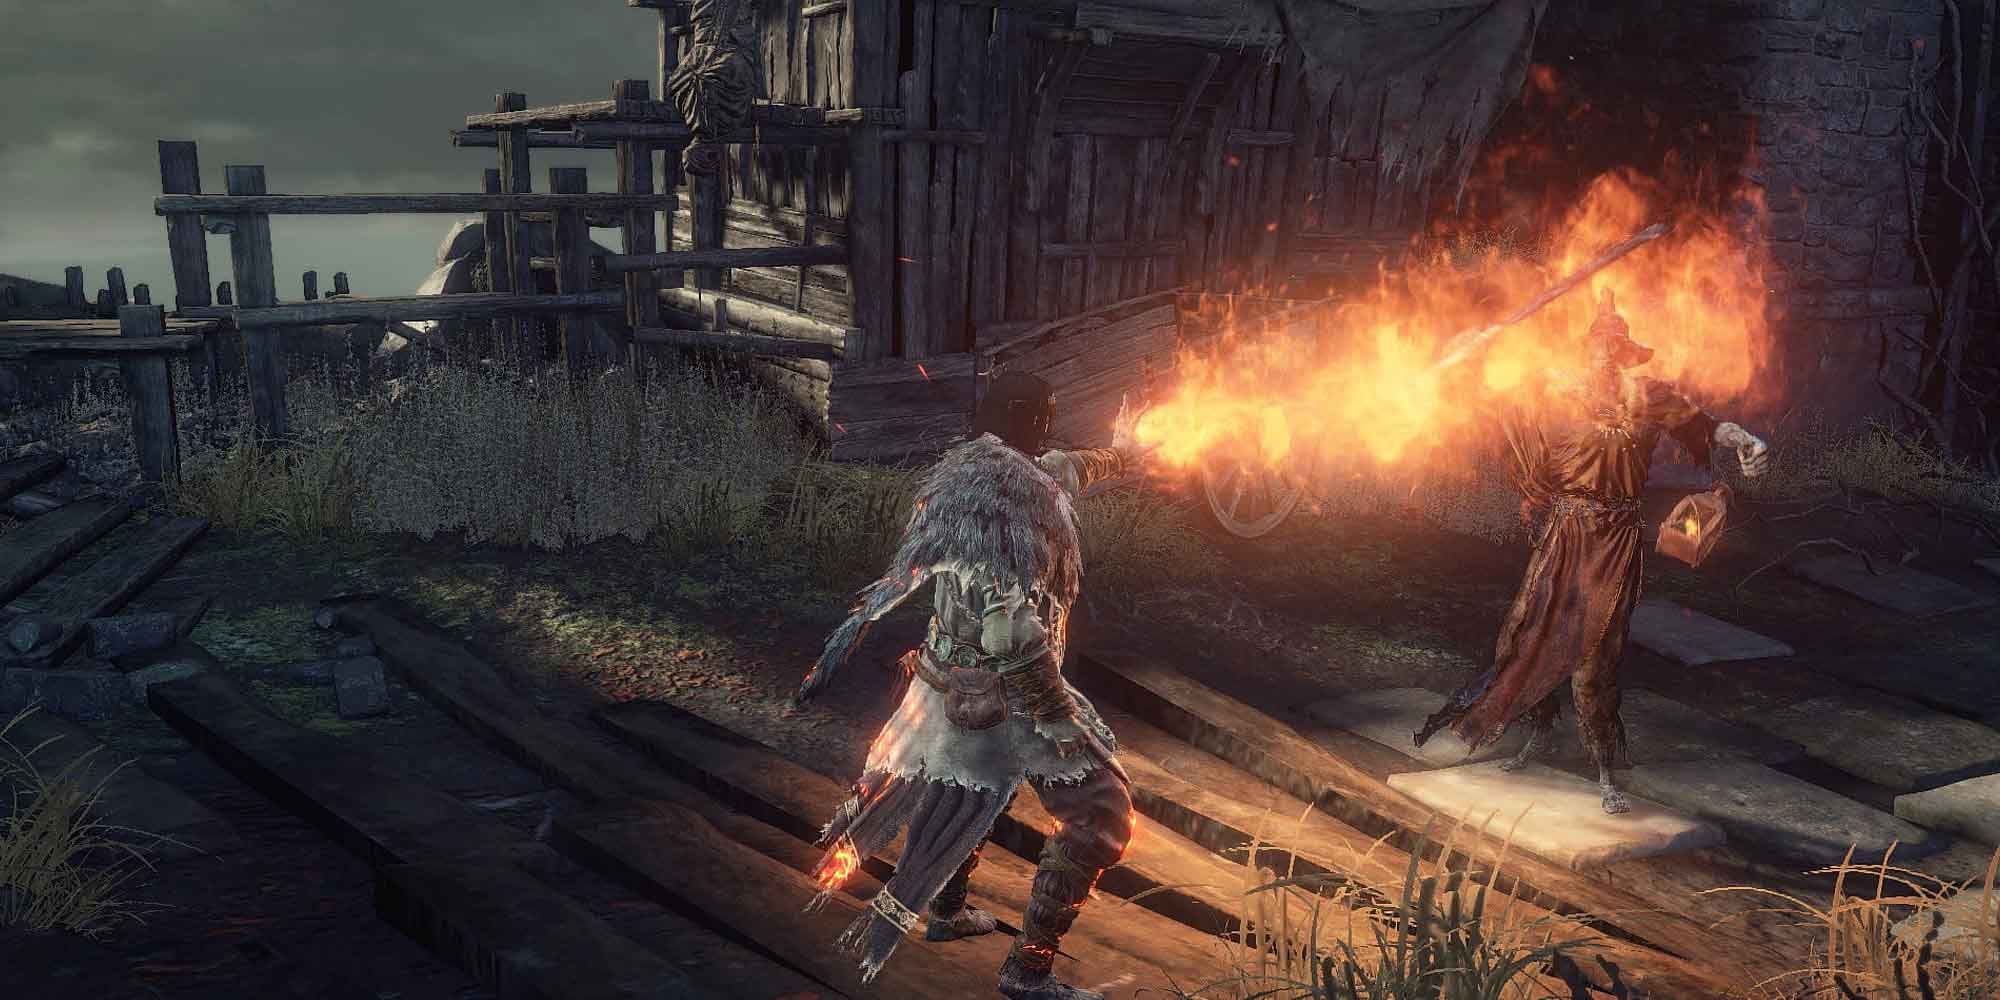 dark-souls-3-15-character-builds-that-make-the-game-way-easier-2023